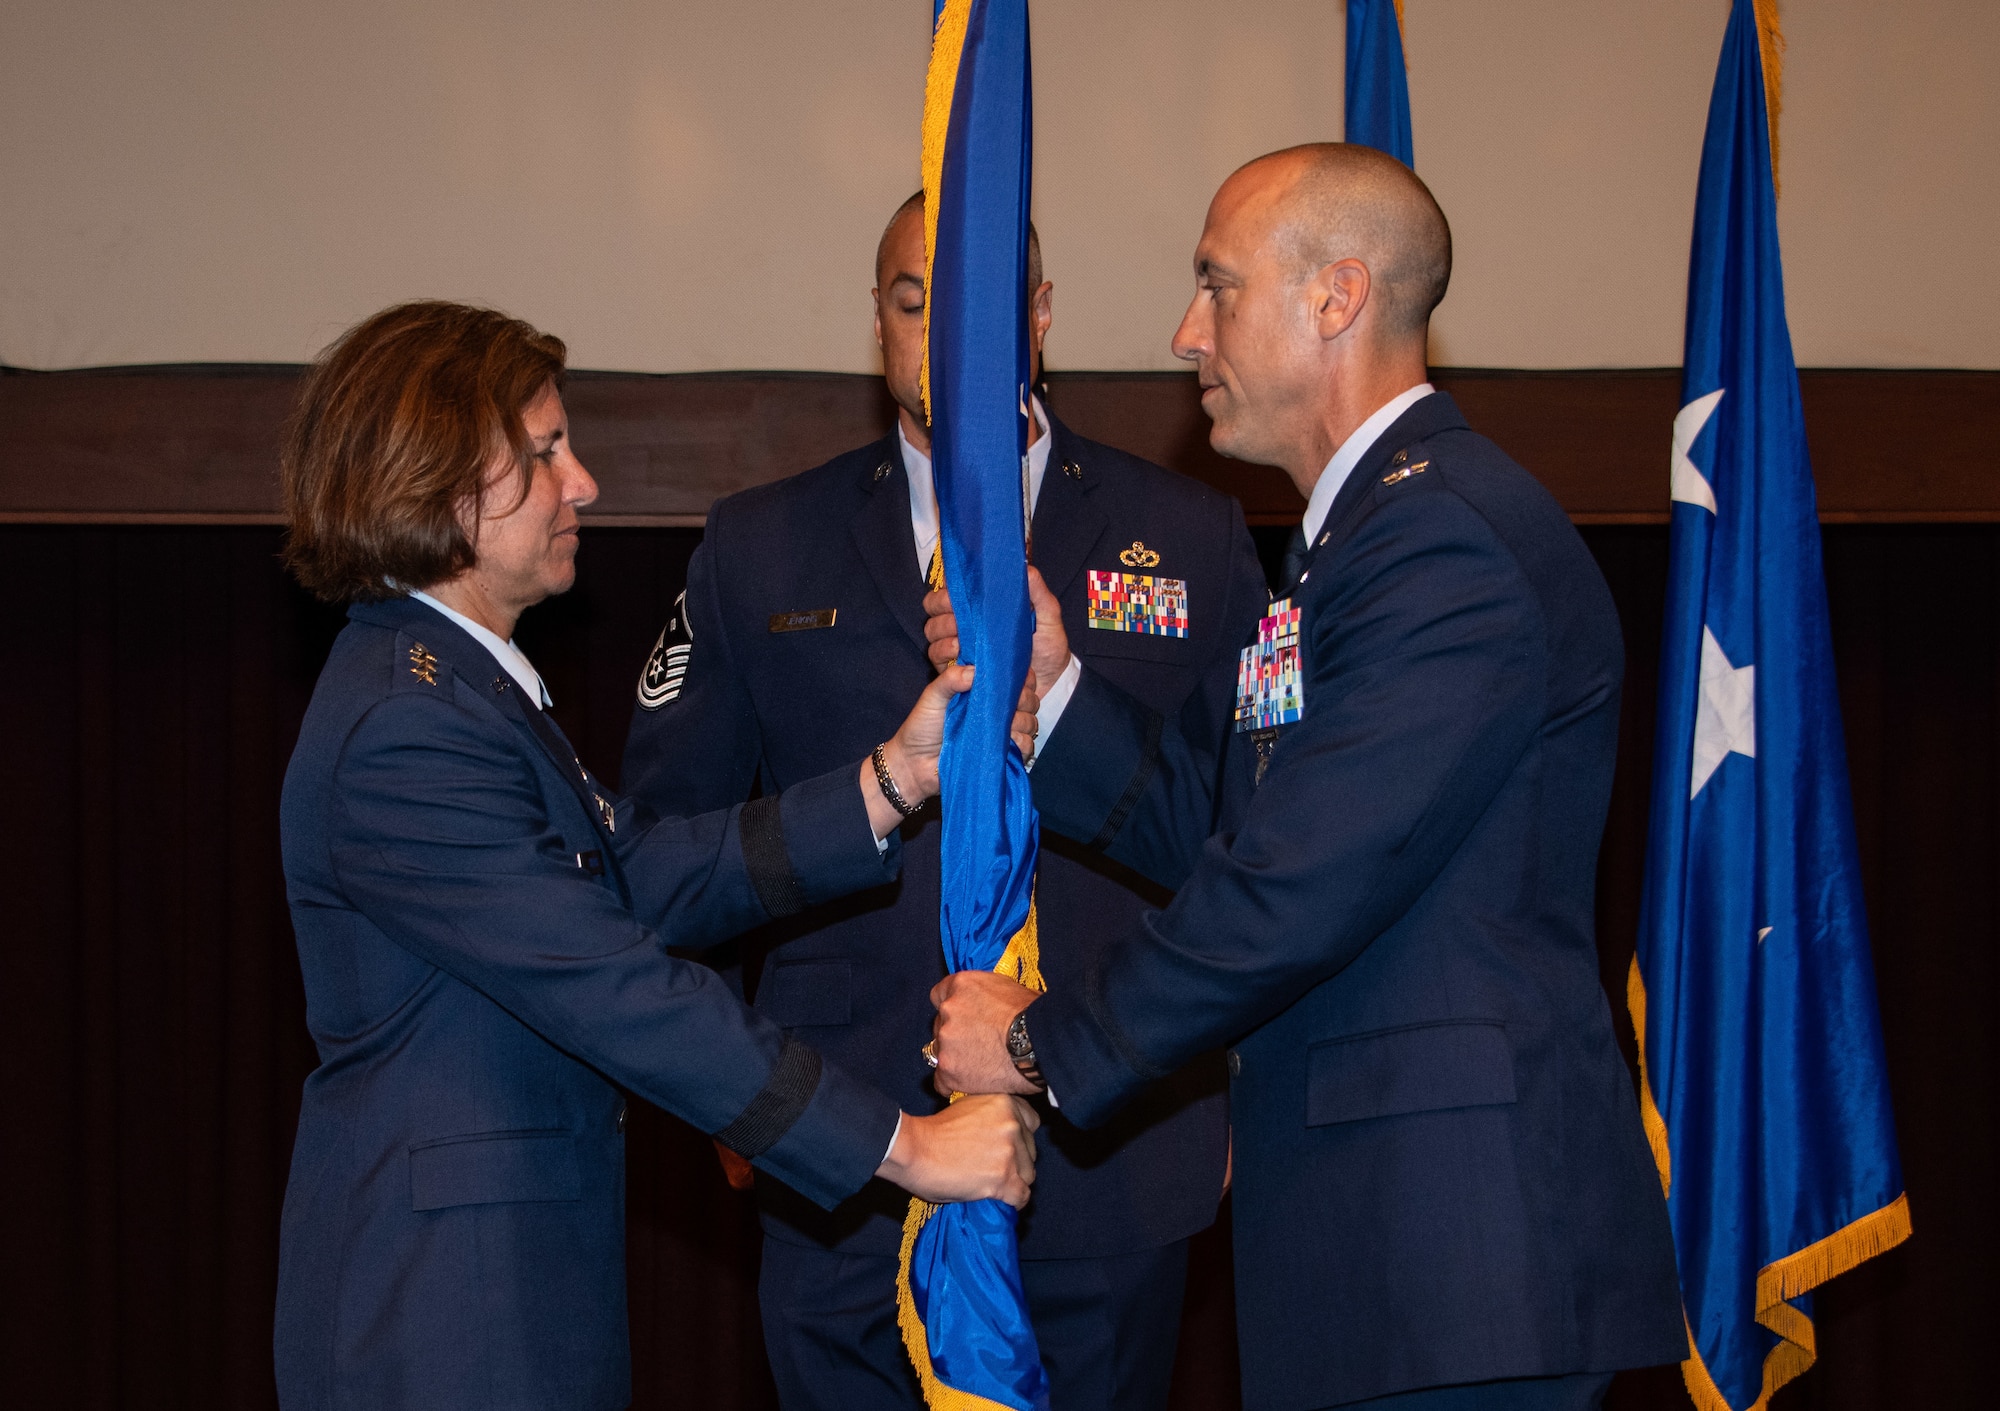 Col. Damian Schlussel assumes command by accepting the Thomas N. Barnes Center for Enlisted Education organizational flag from Lt. Gen. Andrea D. Tullo, Air University commander and president, during a change of command ceremony at the Senior Noncommissioned Officer Academy on Maxwell Air Force Base - Gunter Annex, June 28, 2023. (U.S. Air Force photo/Brian Ferguson)